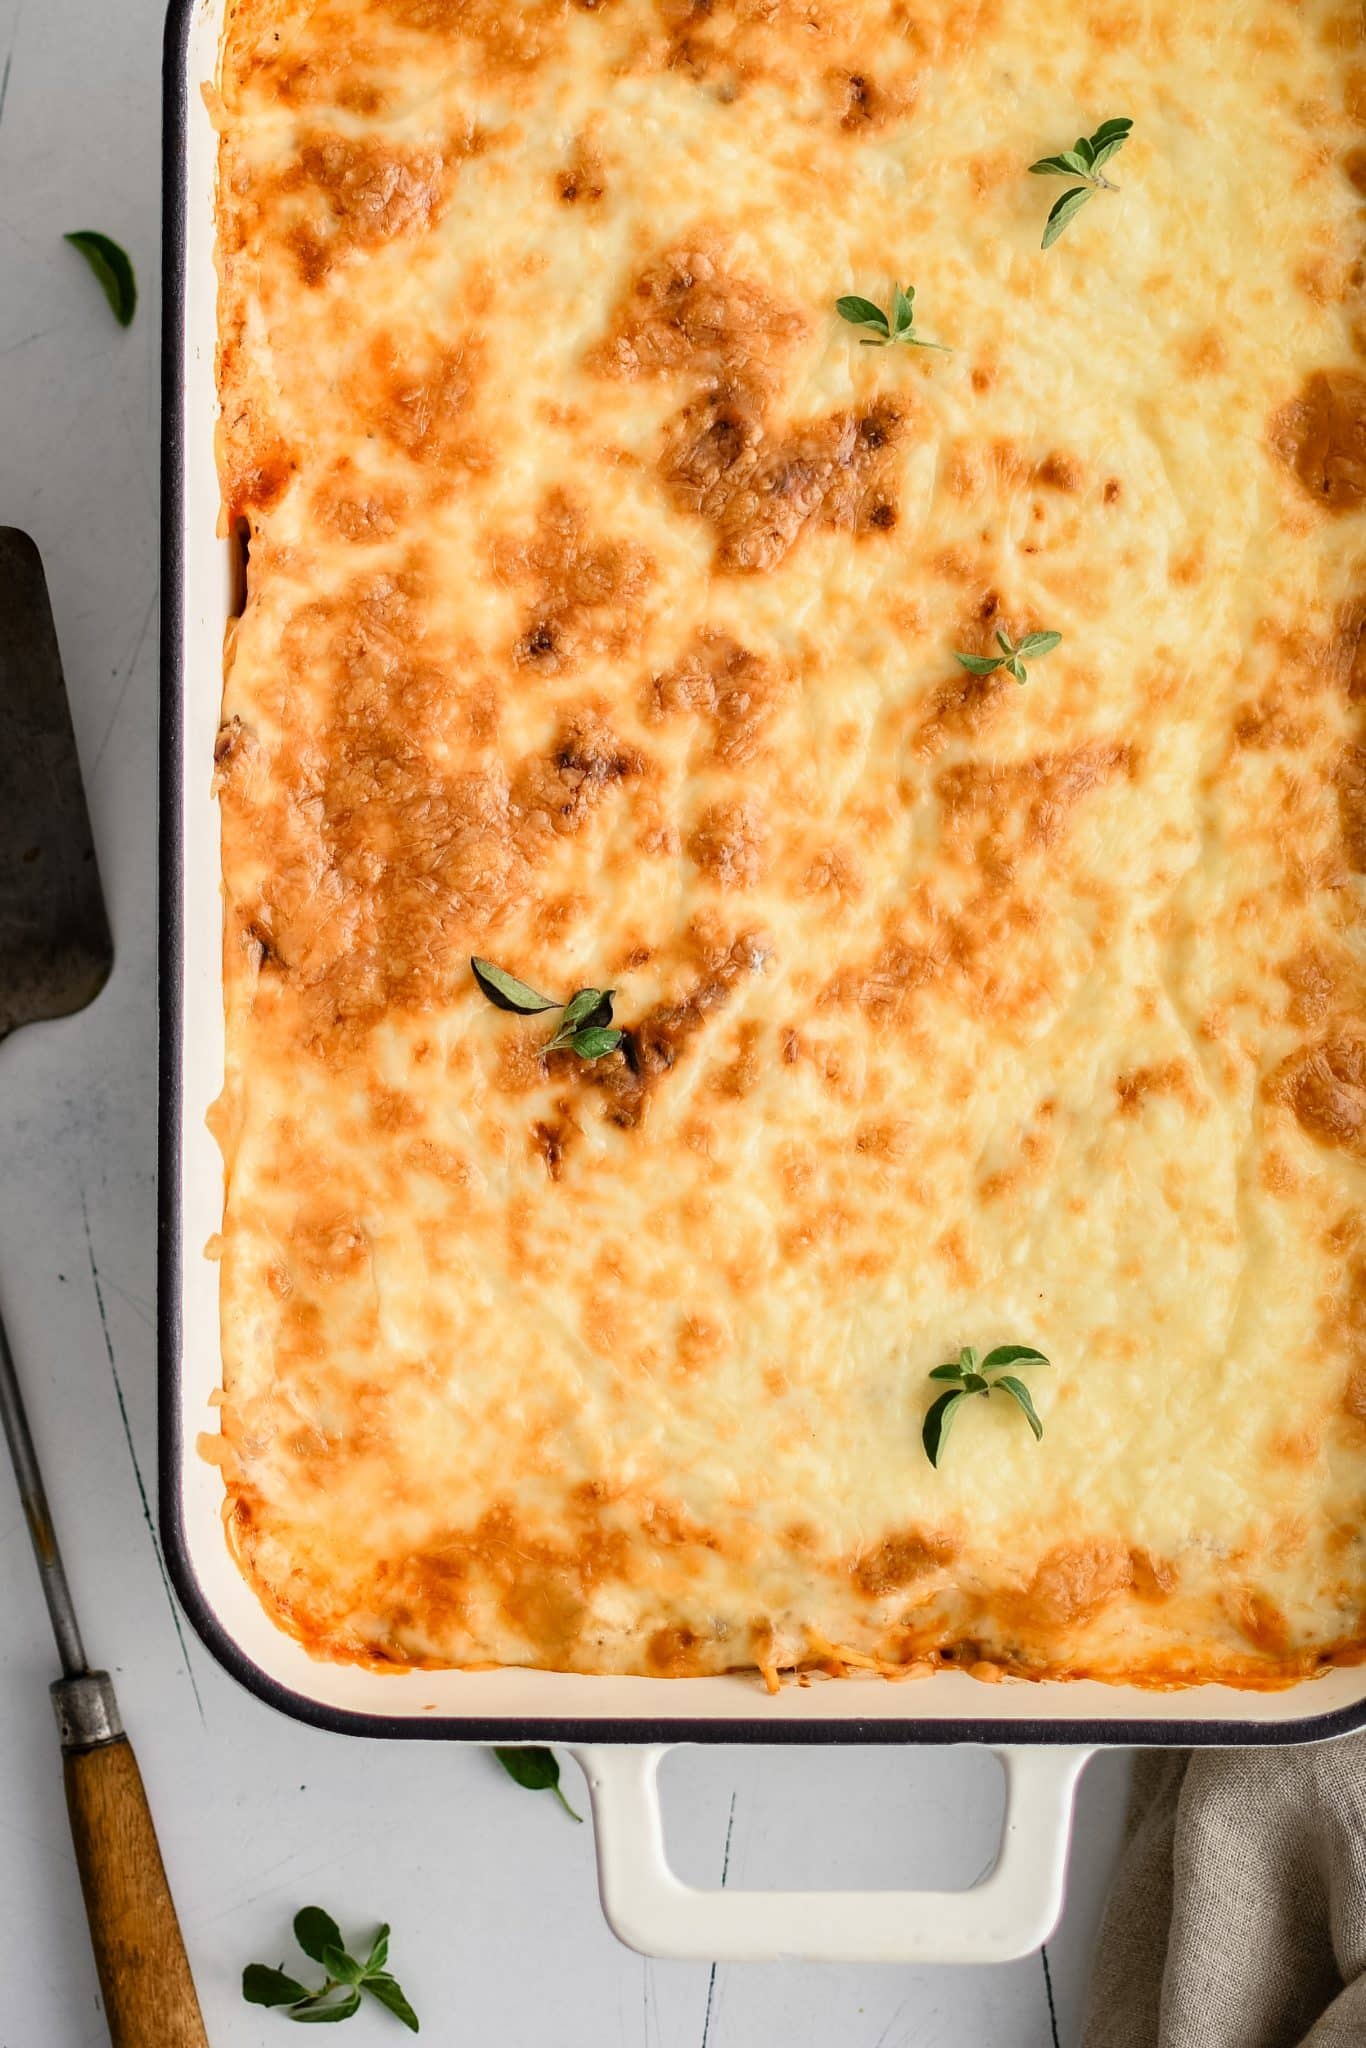 Large casserole dish filled with spaghetti casserole with a top layer of melted, golden, and bubbly mozzarella cheese.